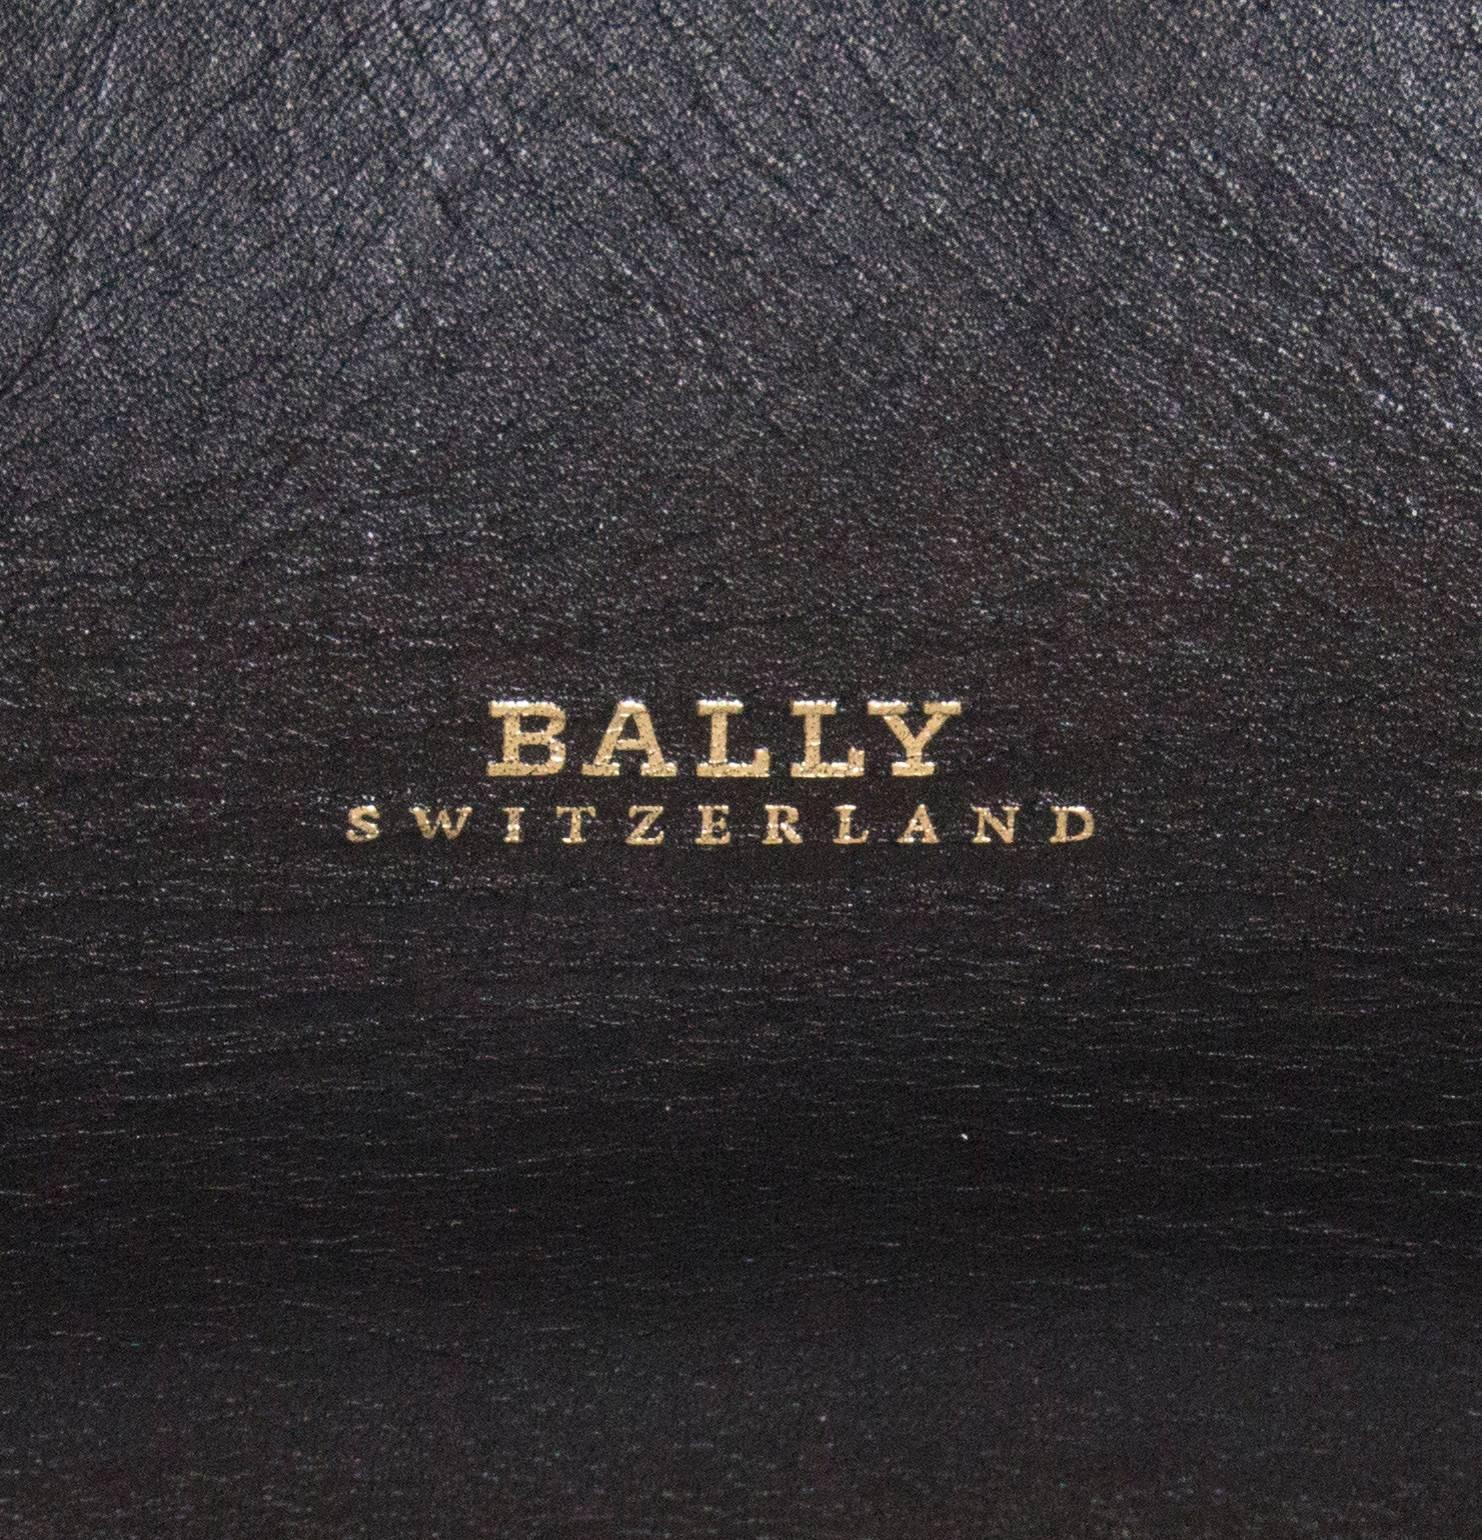 A soft leather bag by Bally . The bag as 2 large handles and 2 small handles and can be worn as a shoulder bag or hand bag.
It has a lined base, and the dimensions are : base 10'' x 11'', height  15''.